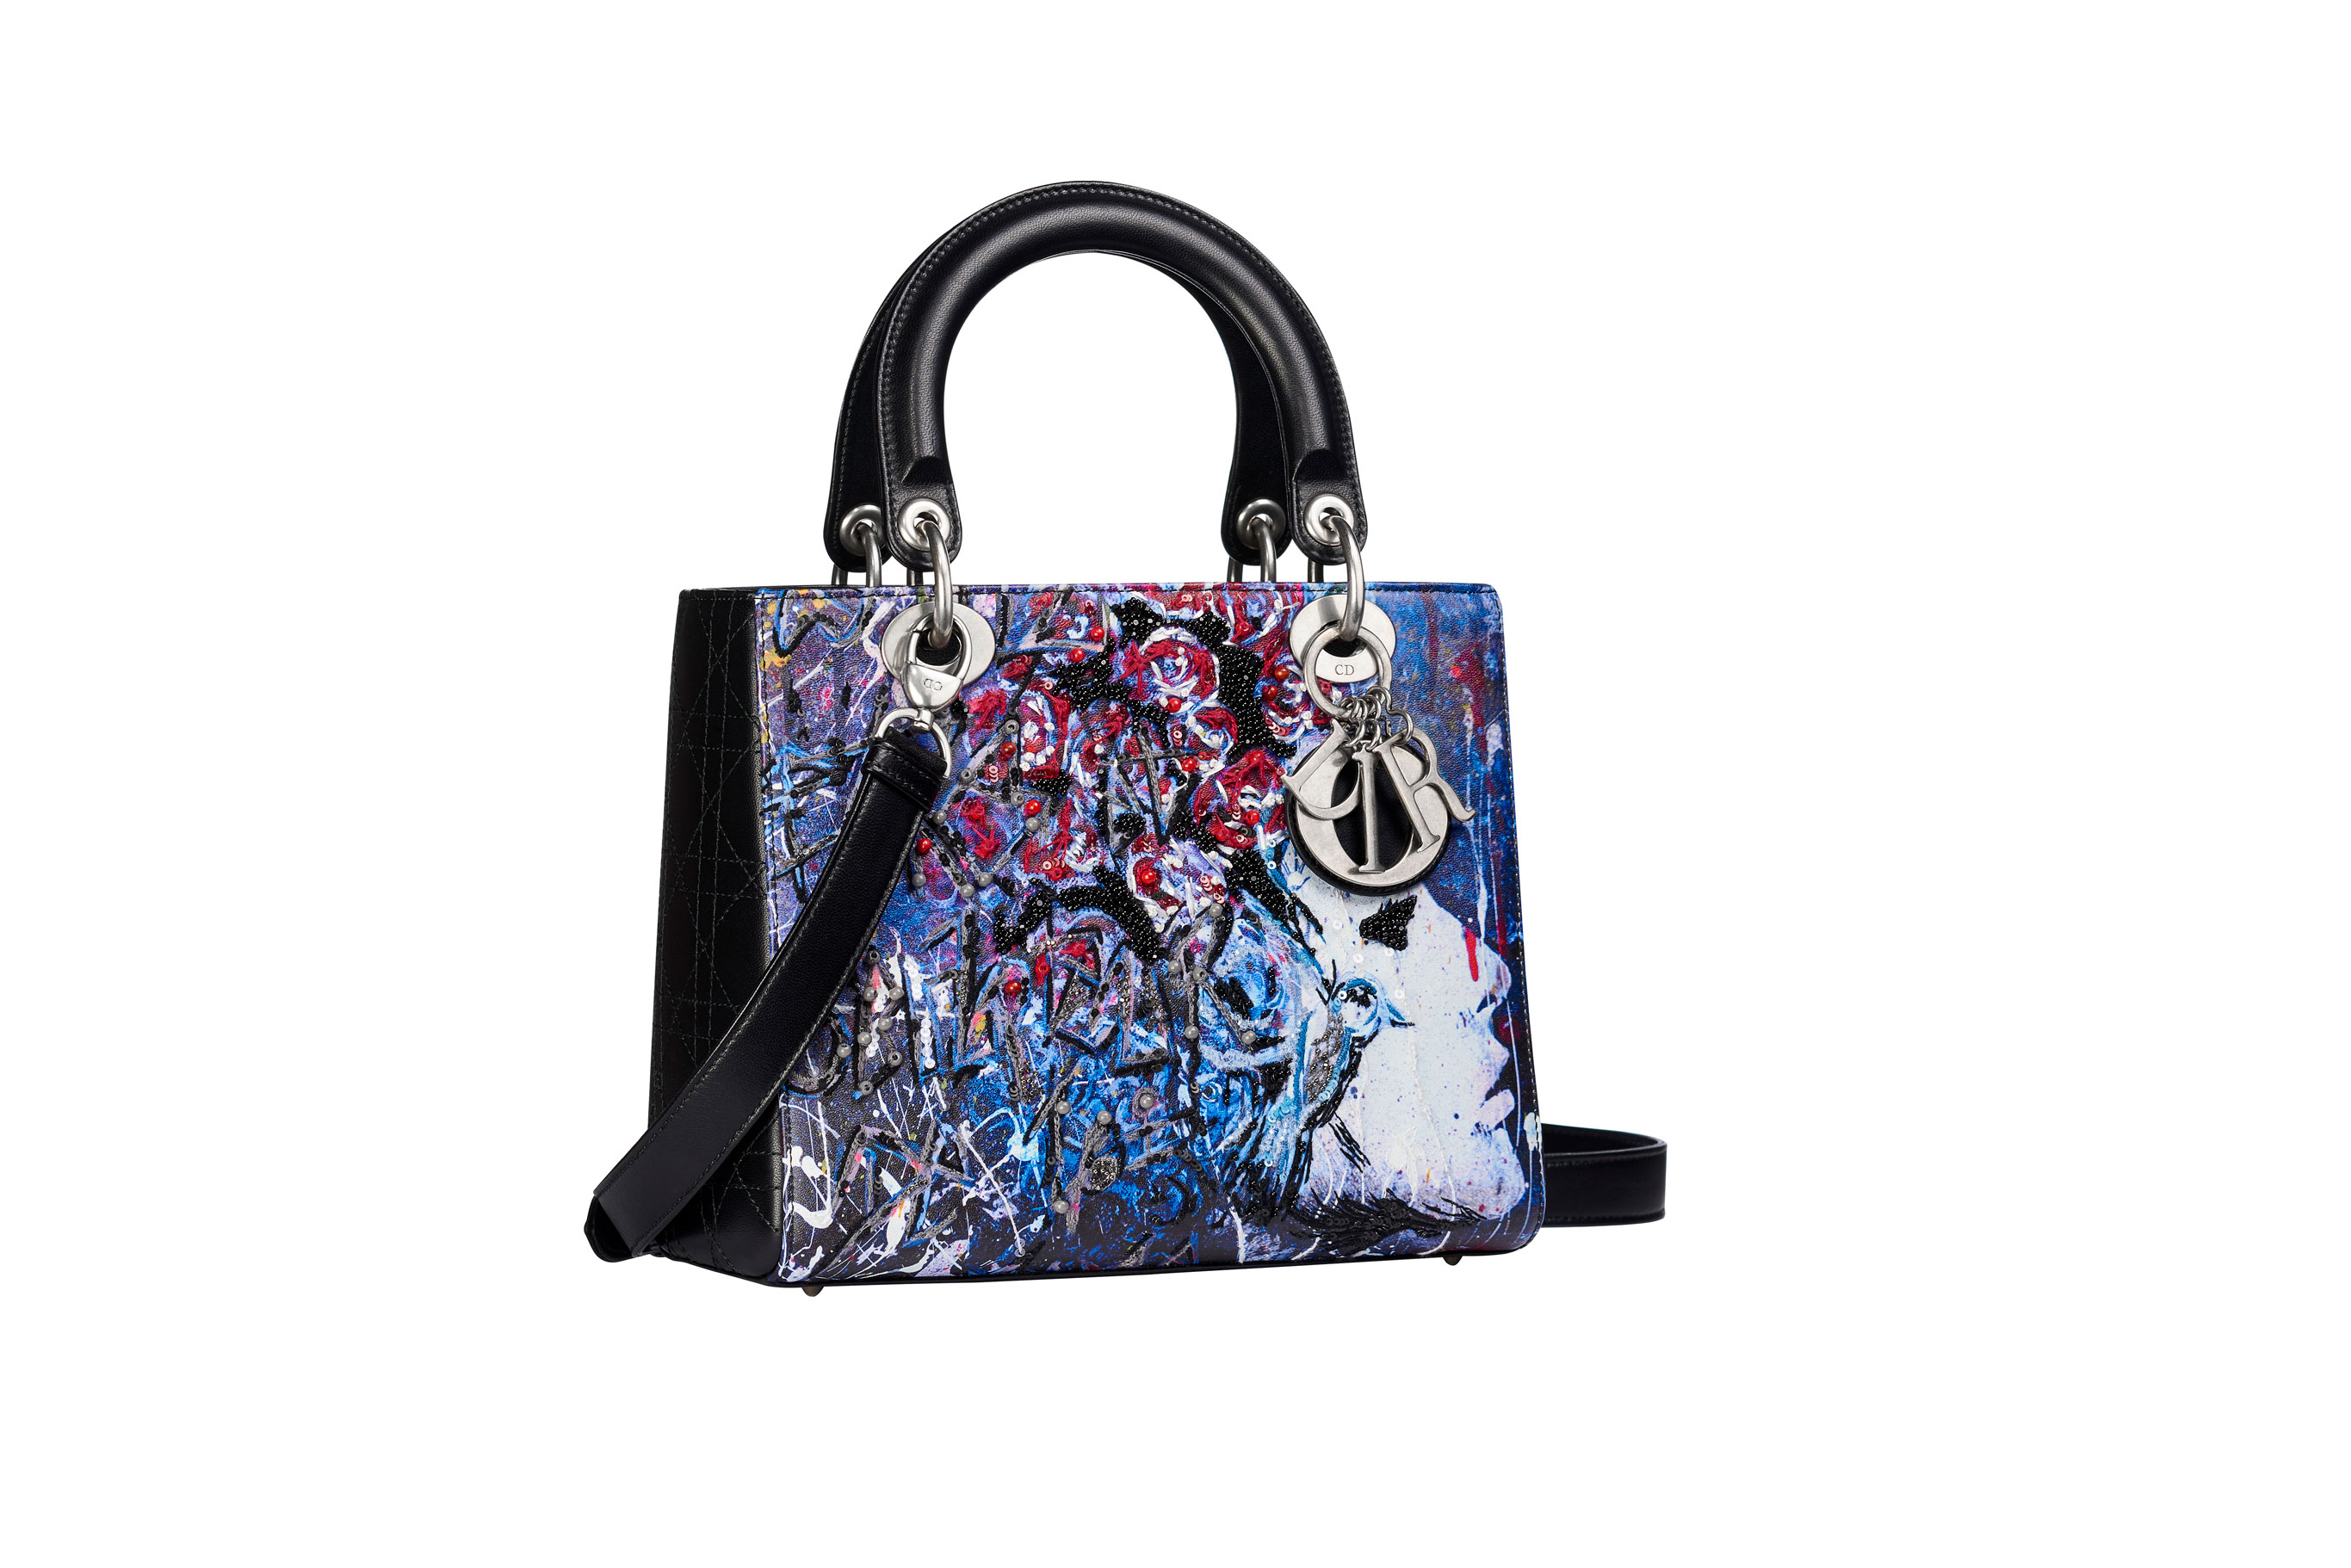 Dior Lady Art 2 collection created by 10 artists for sale in Australia